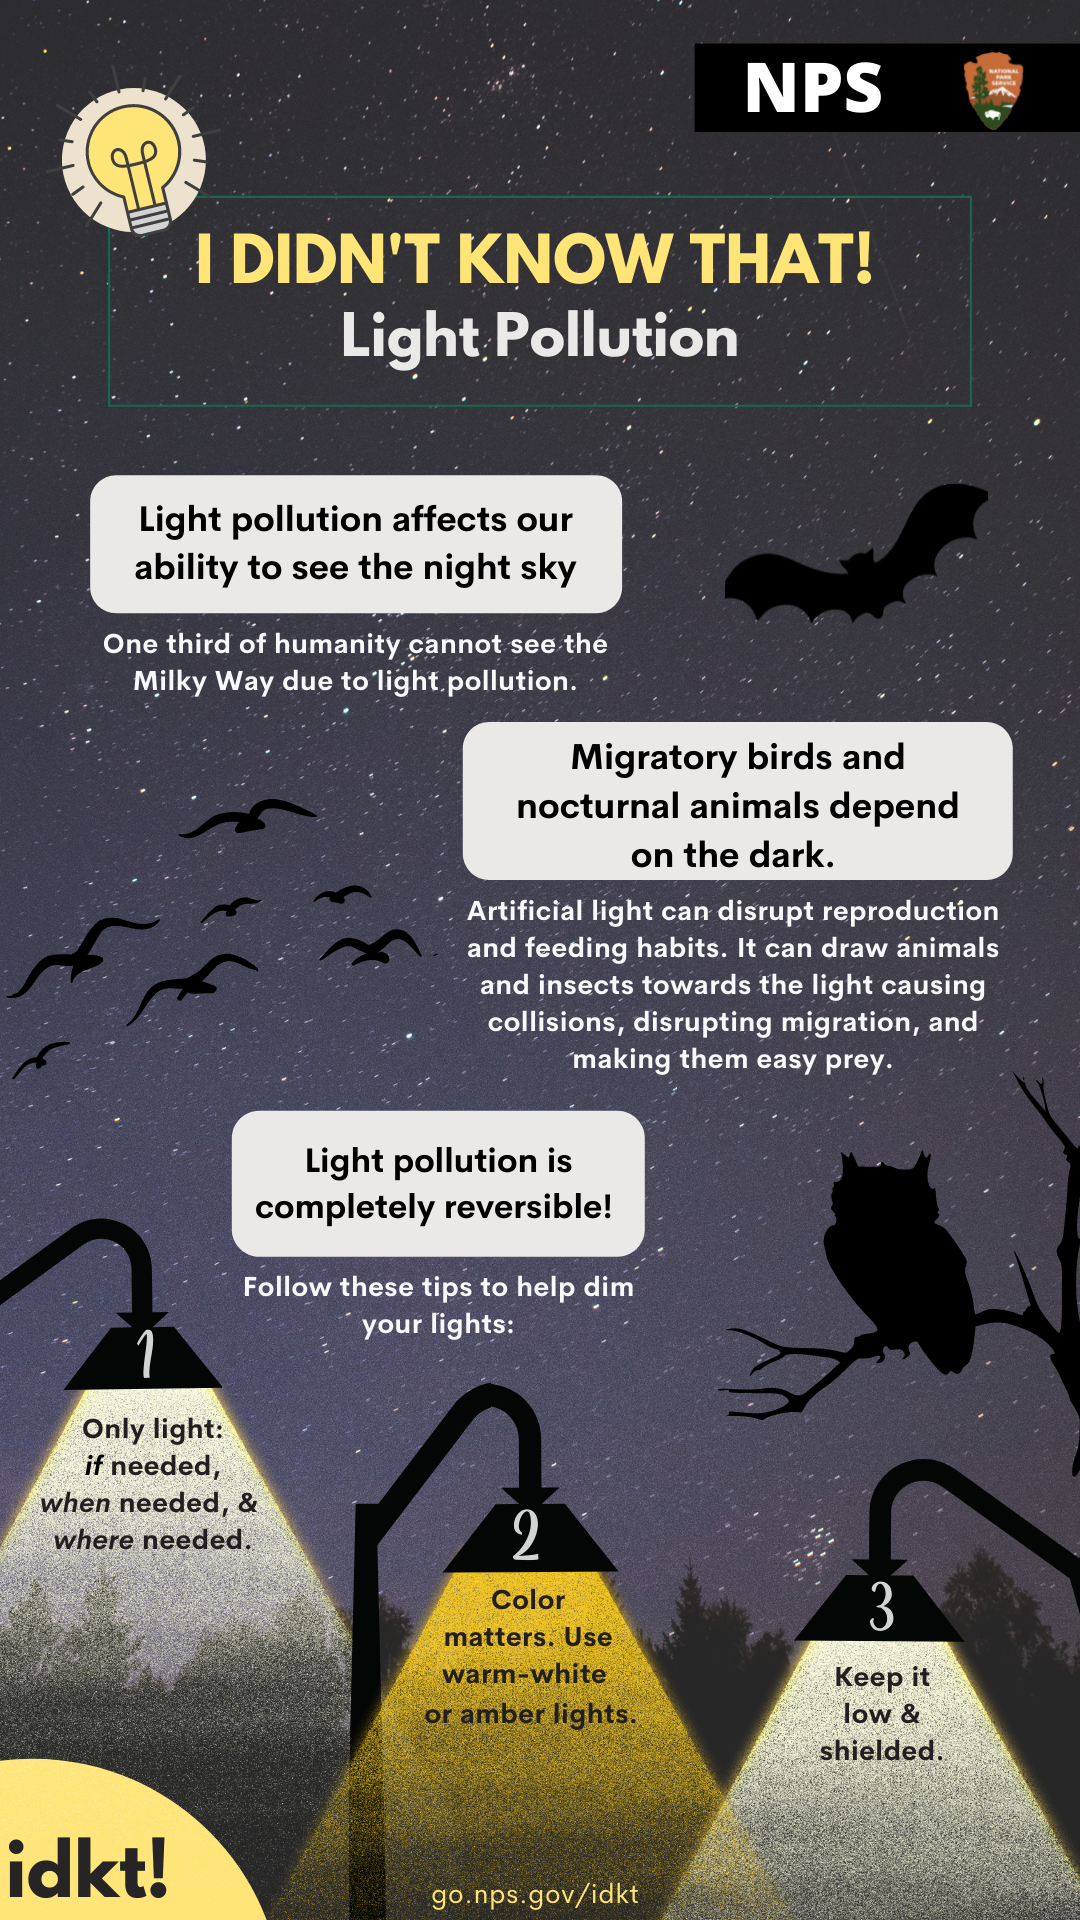 An infographic showing how light pollution affects us and animals as well as tips on how to reduce light pollution. Full text description available below image